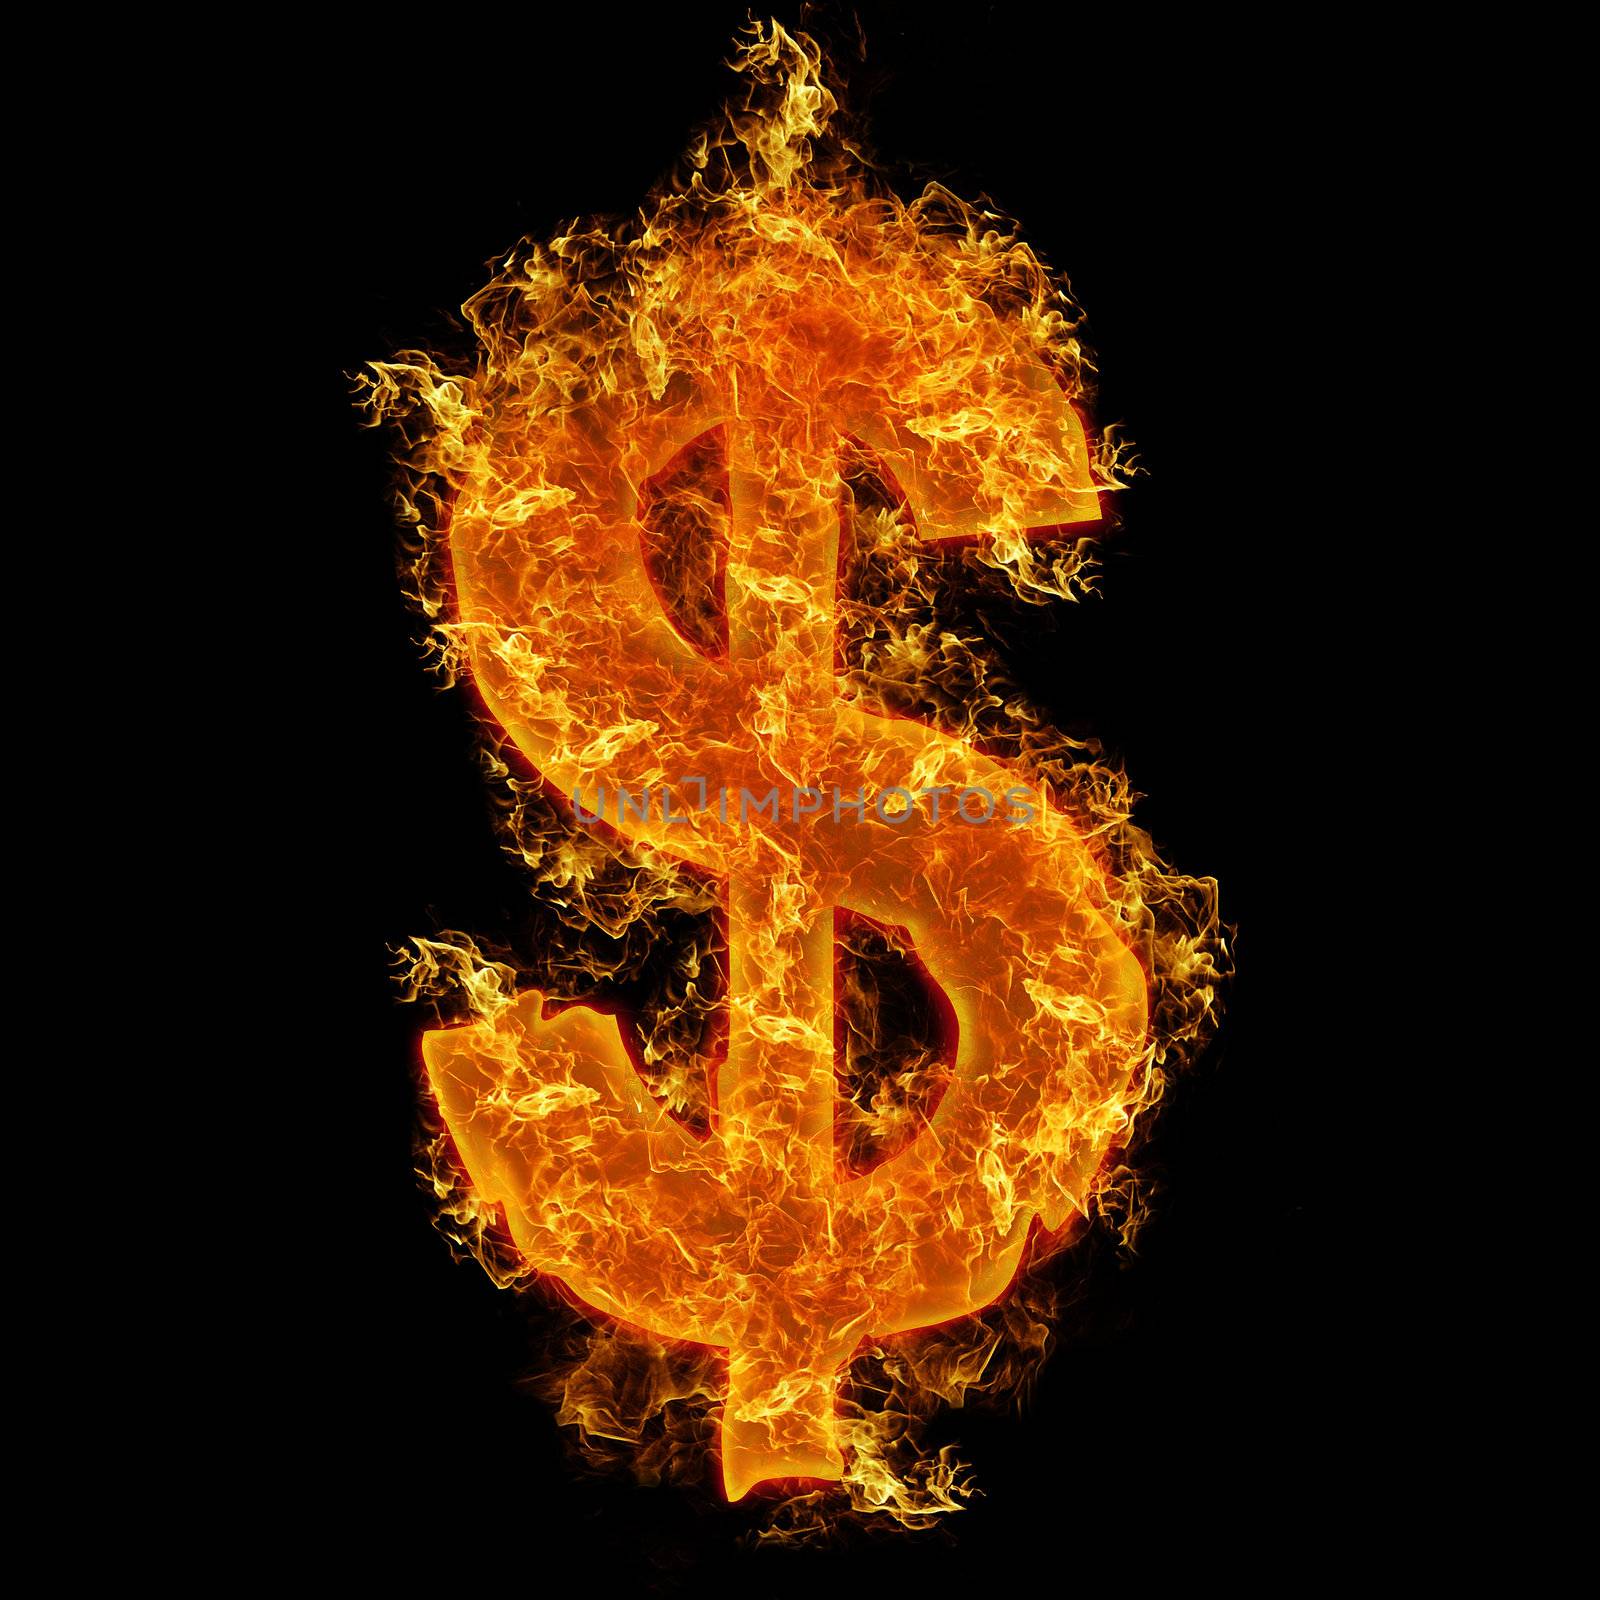 Fire dollar sign by rusak